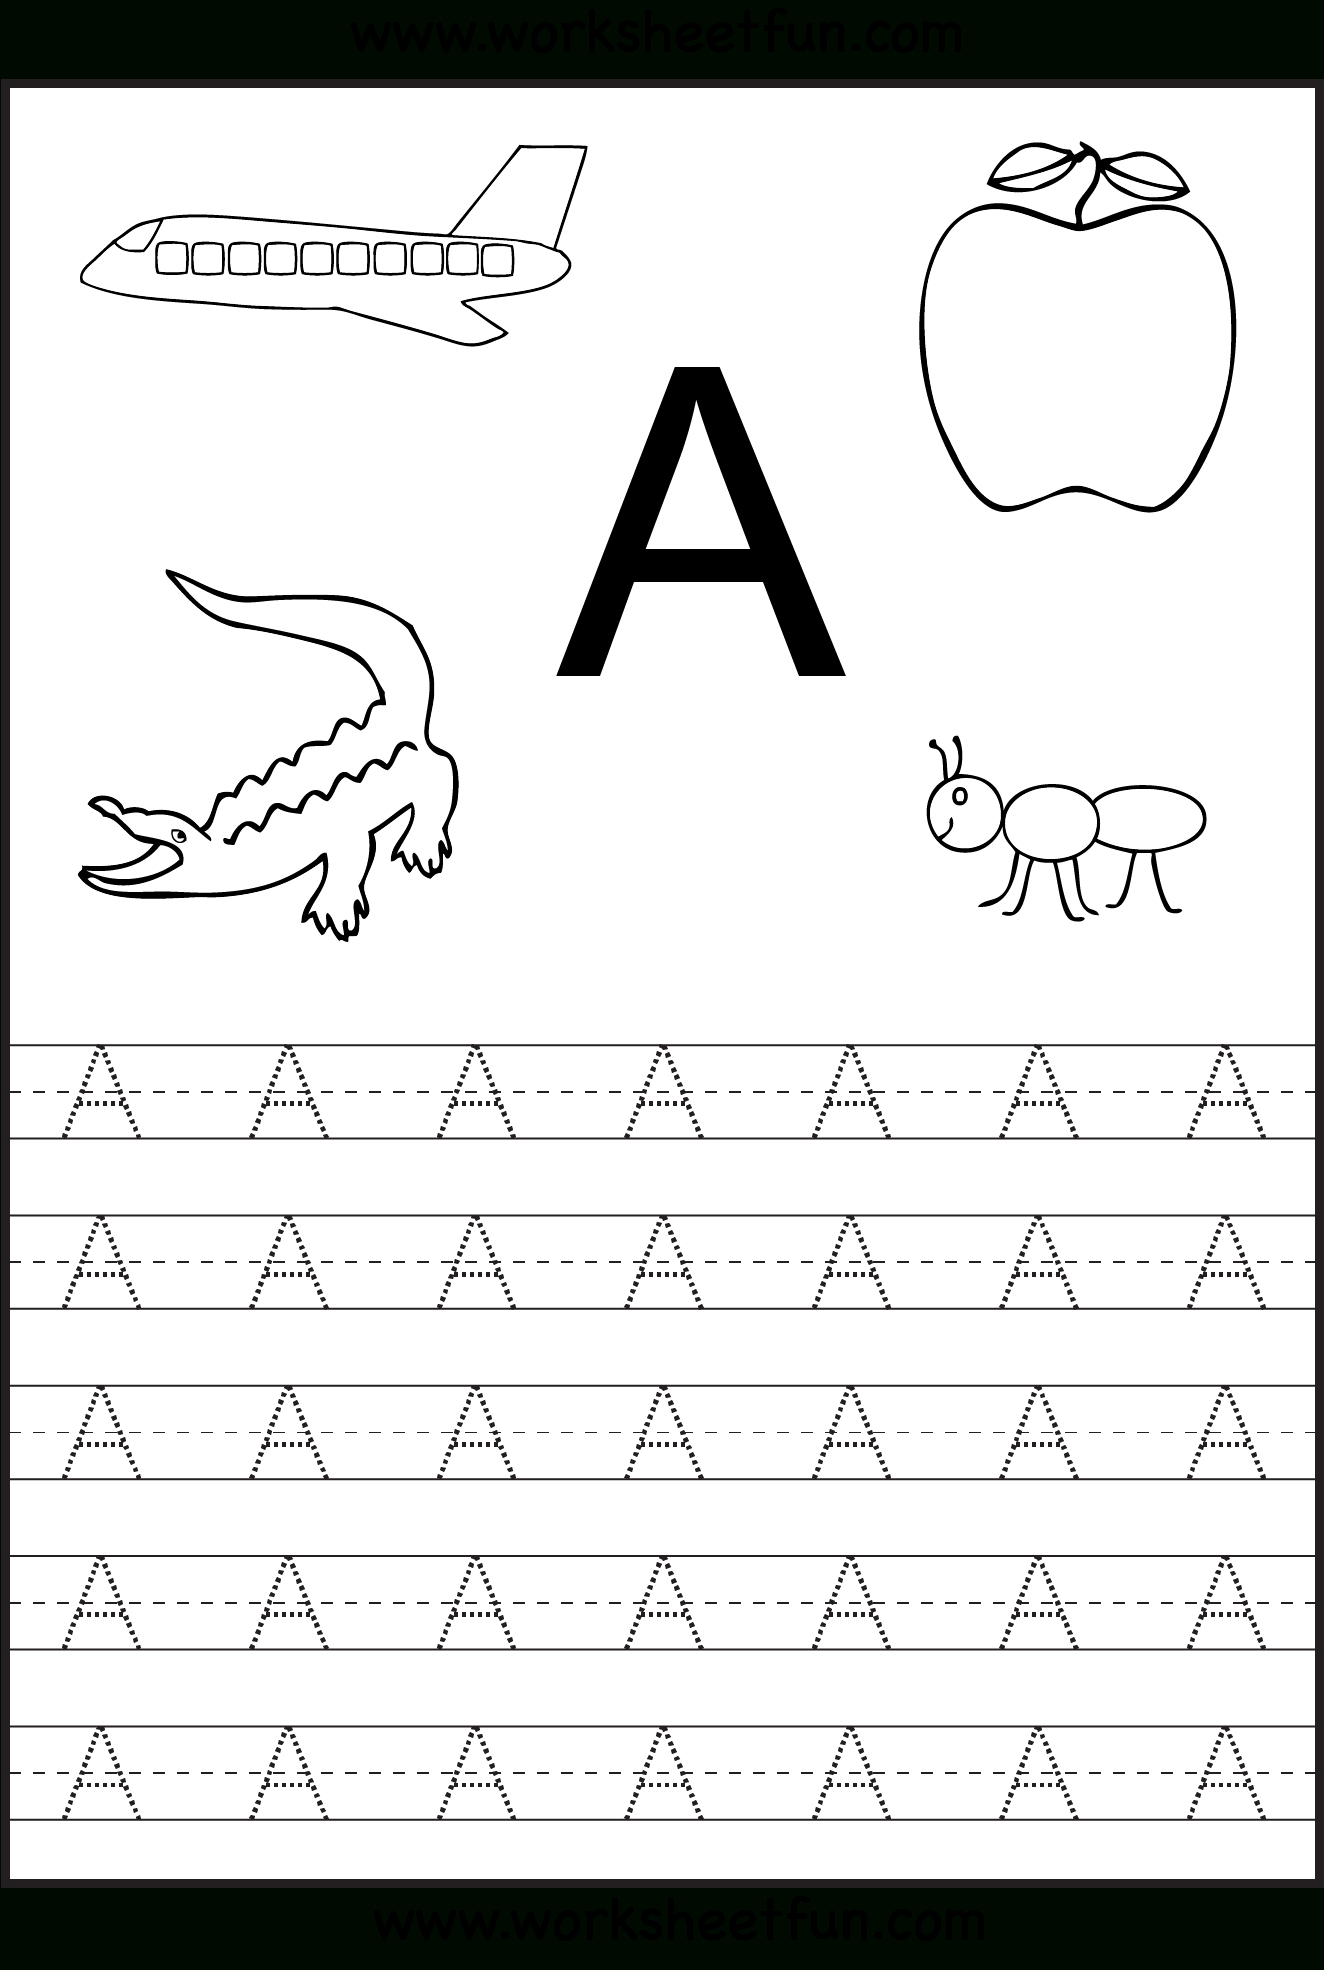 Free Printable Worksheets: Letter Tracing Worksheets For Kin in Letter I Tracing Worksheets For Kindergarten